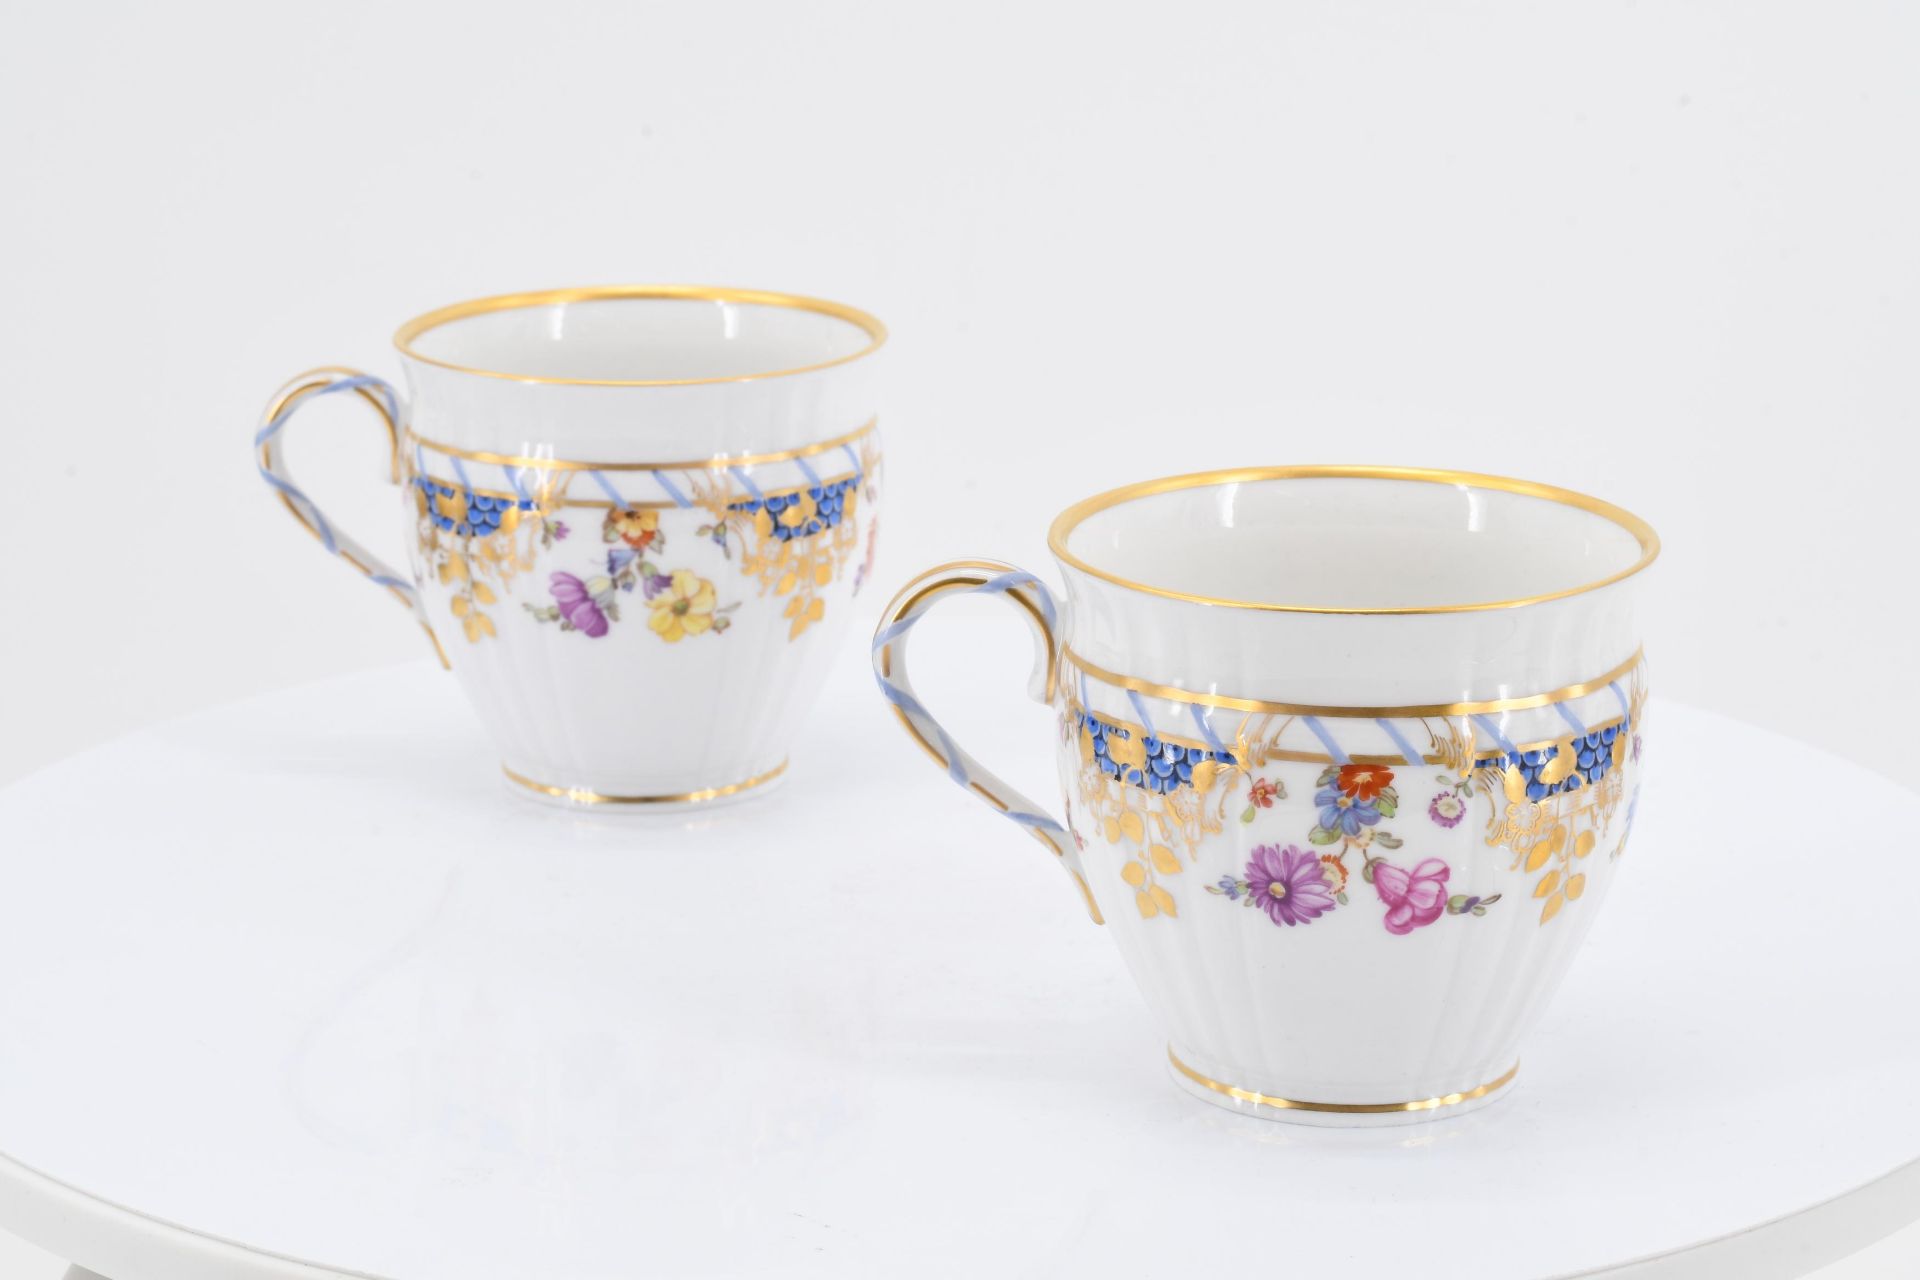 Coffee service 'Breslauer Stadtschloss' for 6 persons - Image 23 of 27